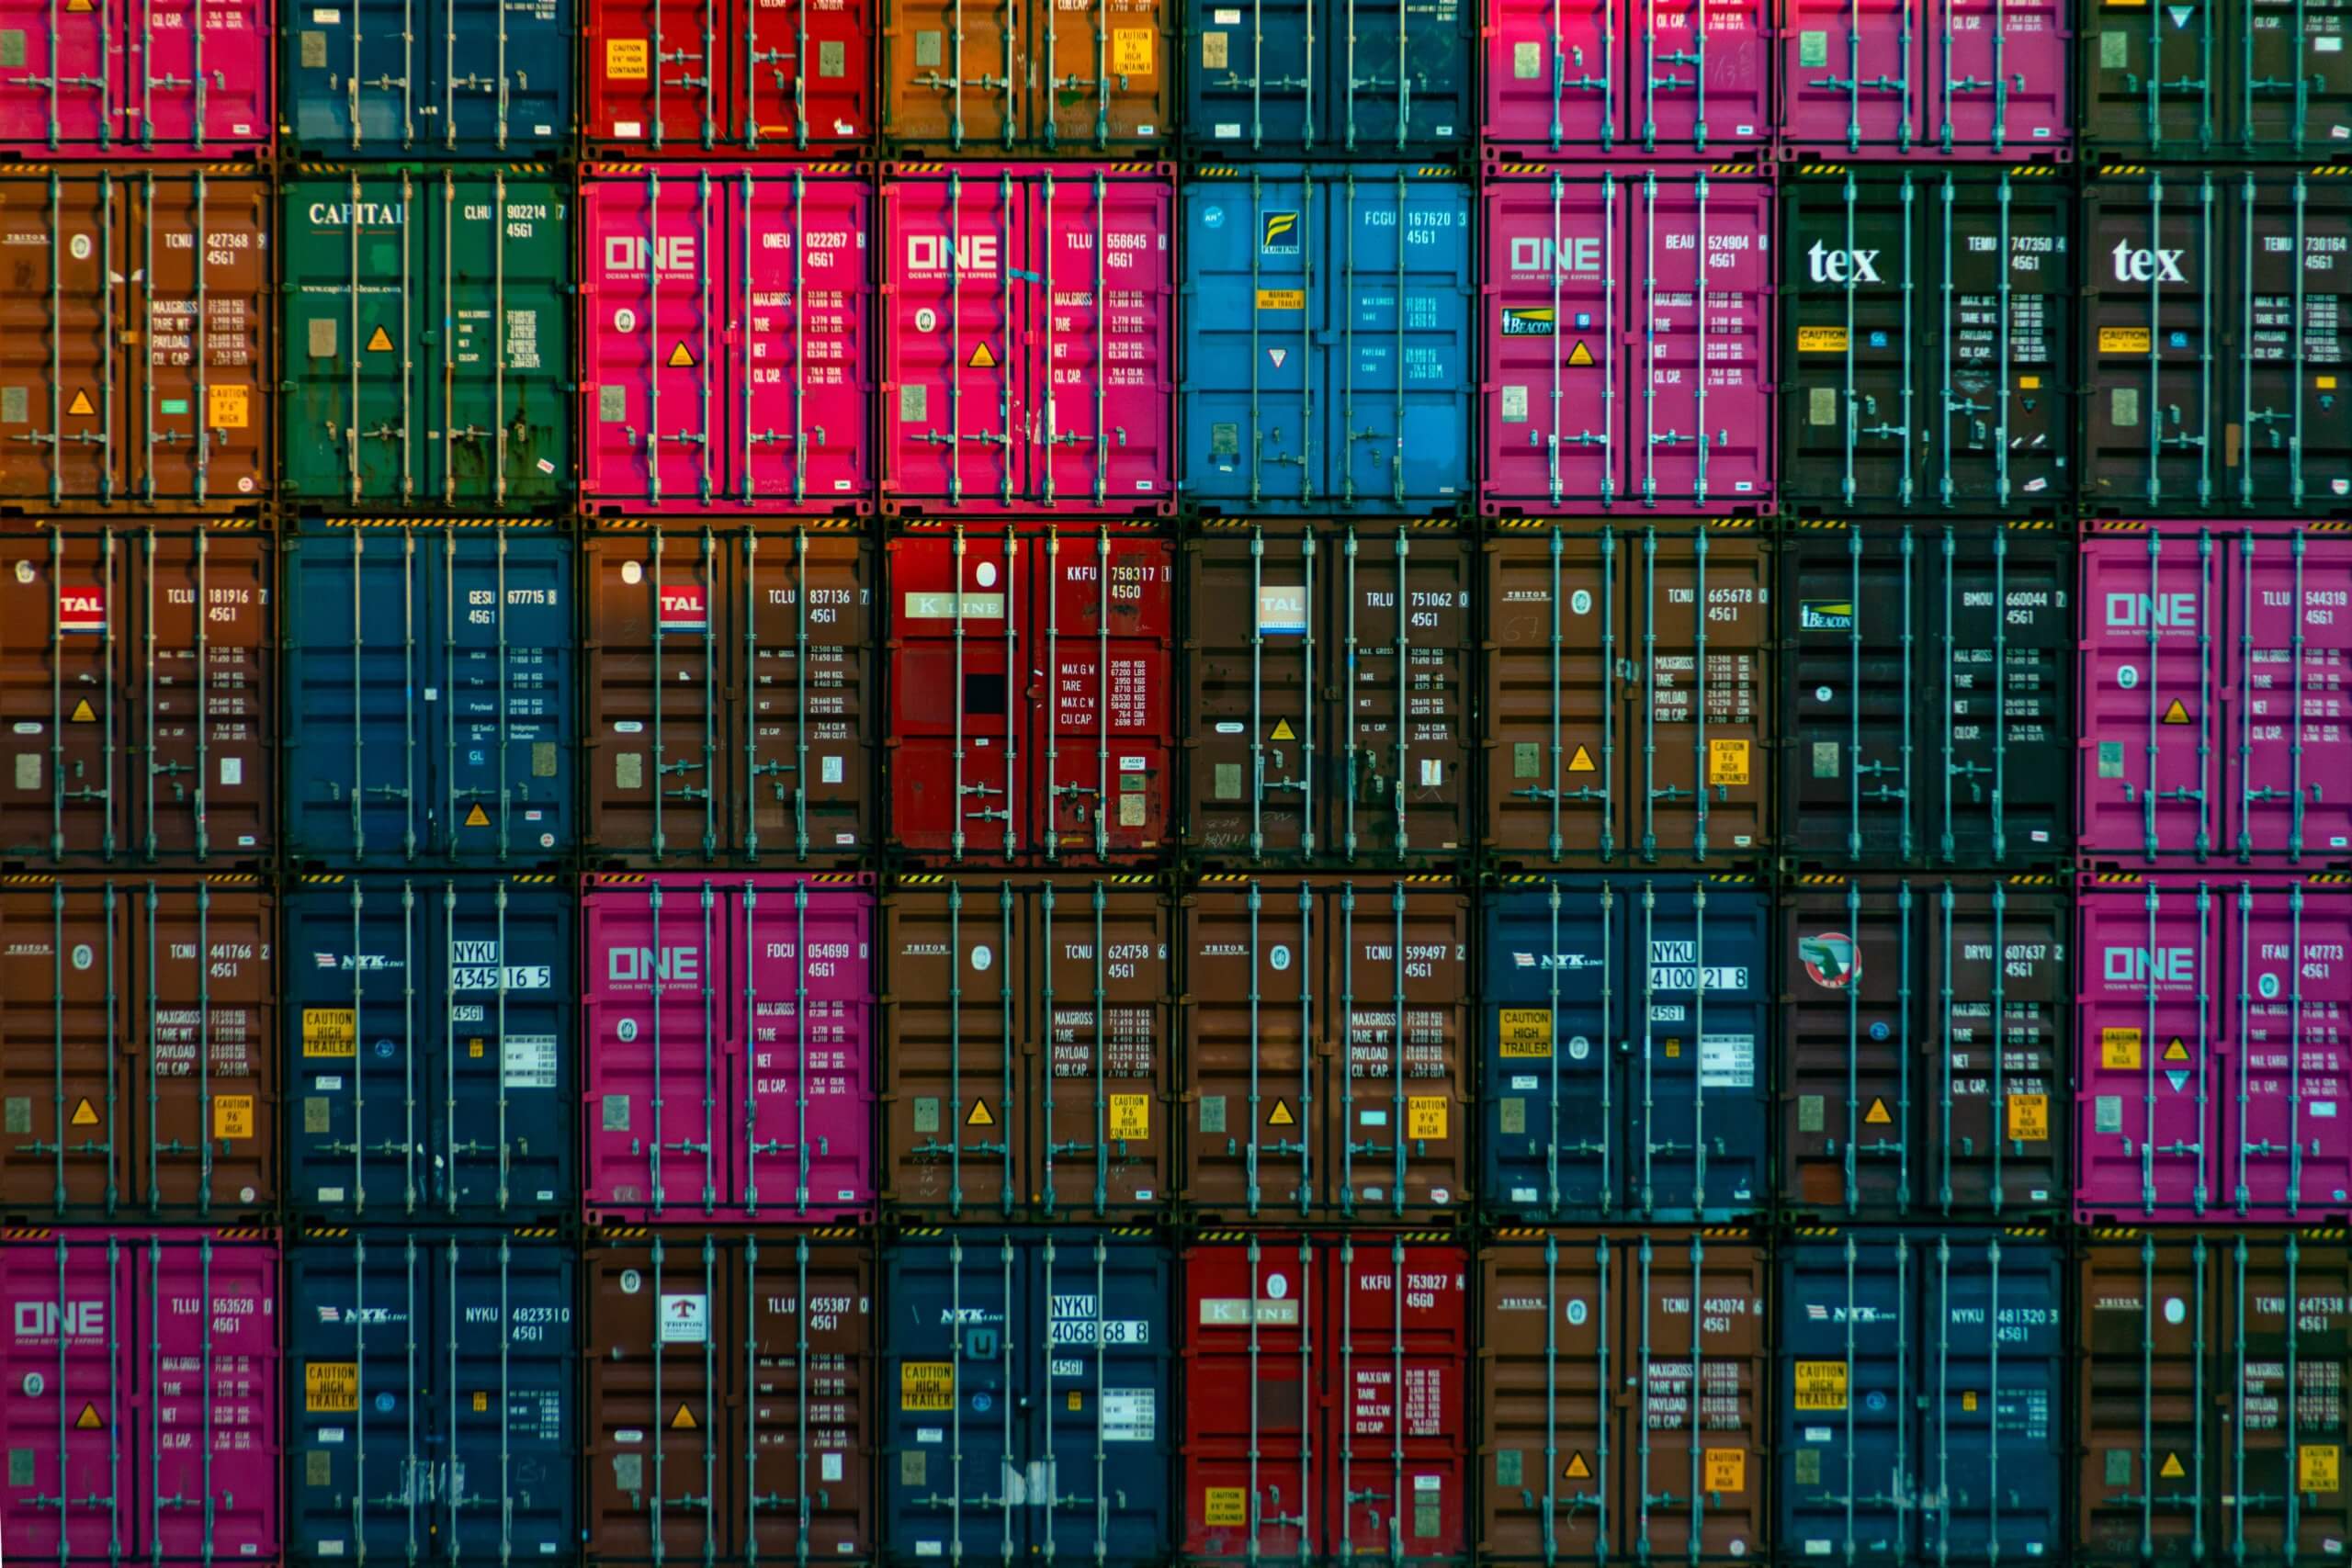 containerized toolchain image showing grid of shipping containers